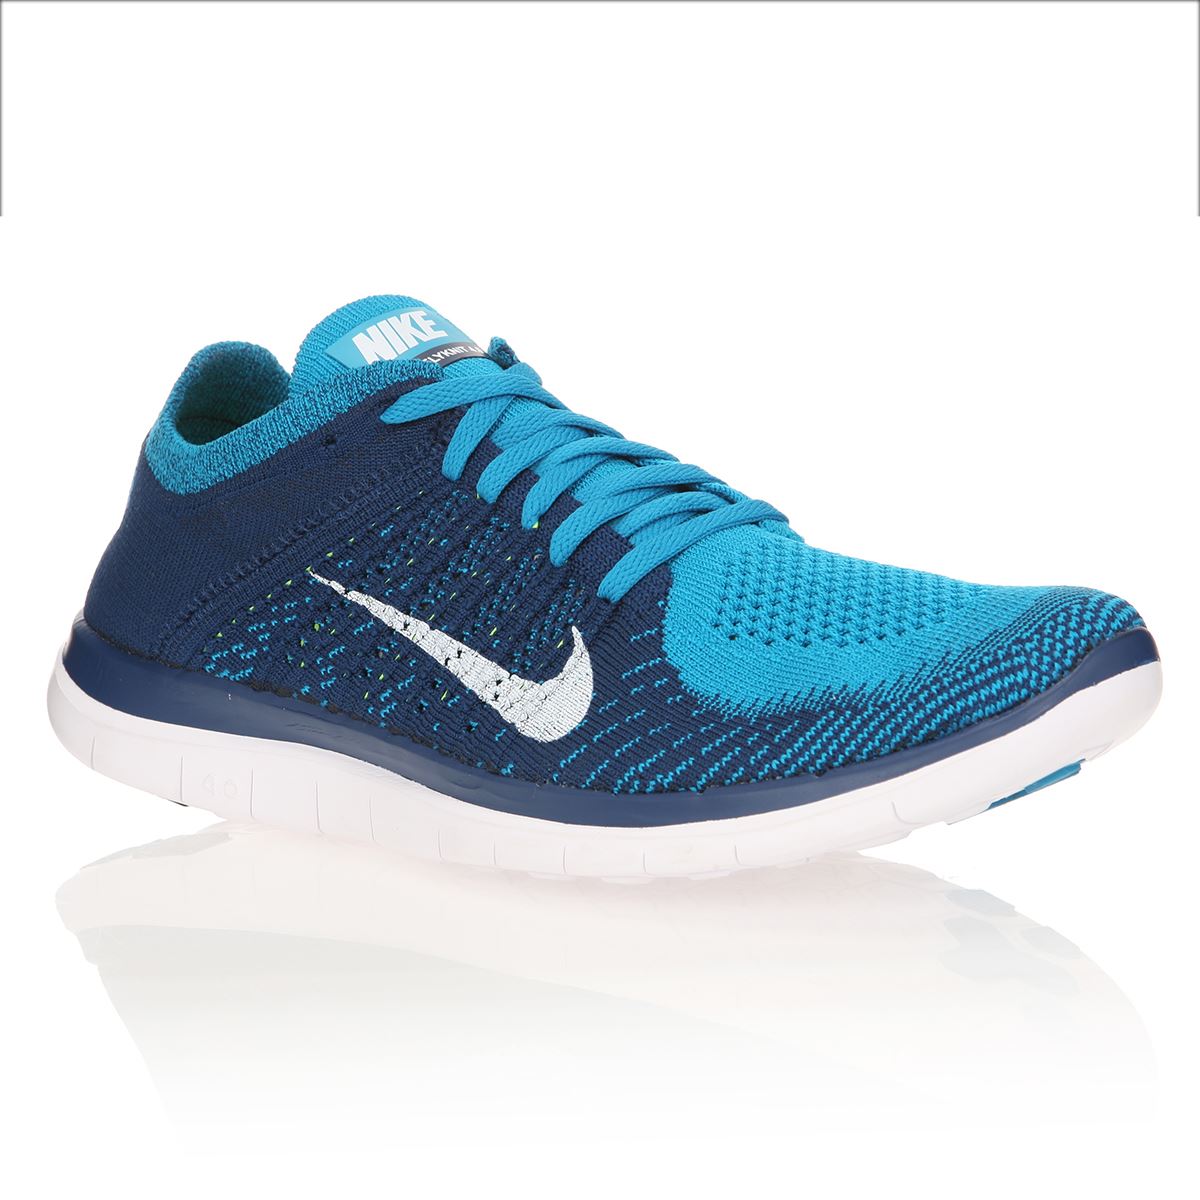 NIKE Chaussures running Free Run 4.0 Flyknit Homme Prix pas cher